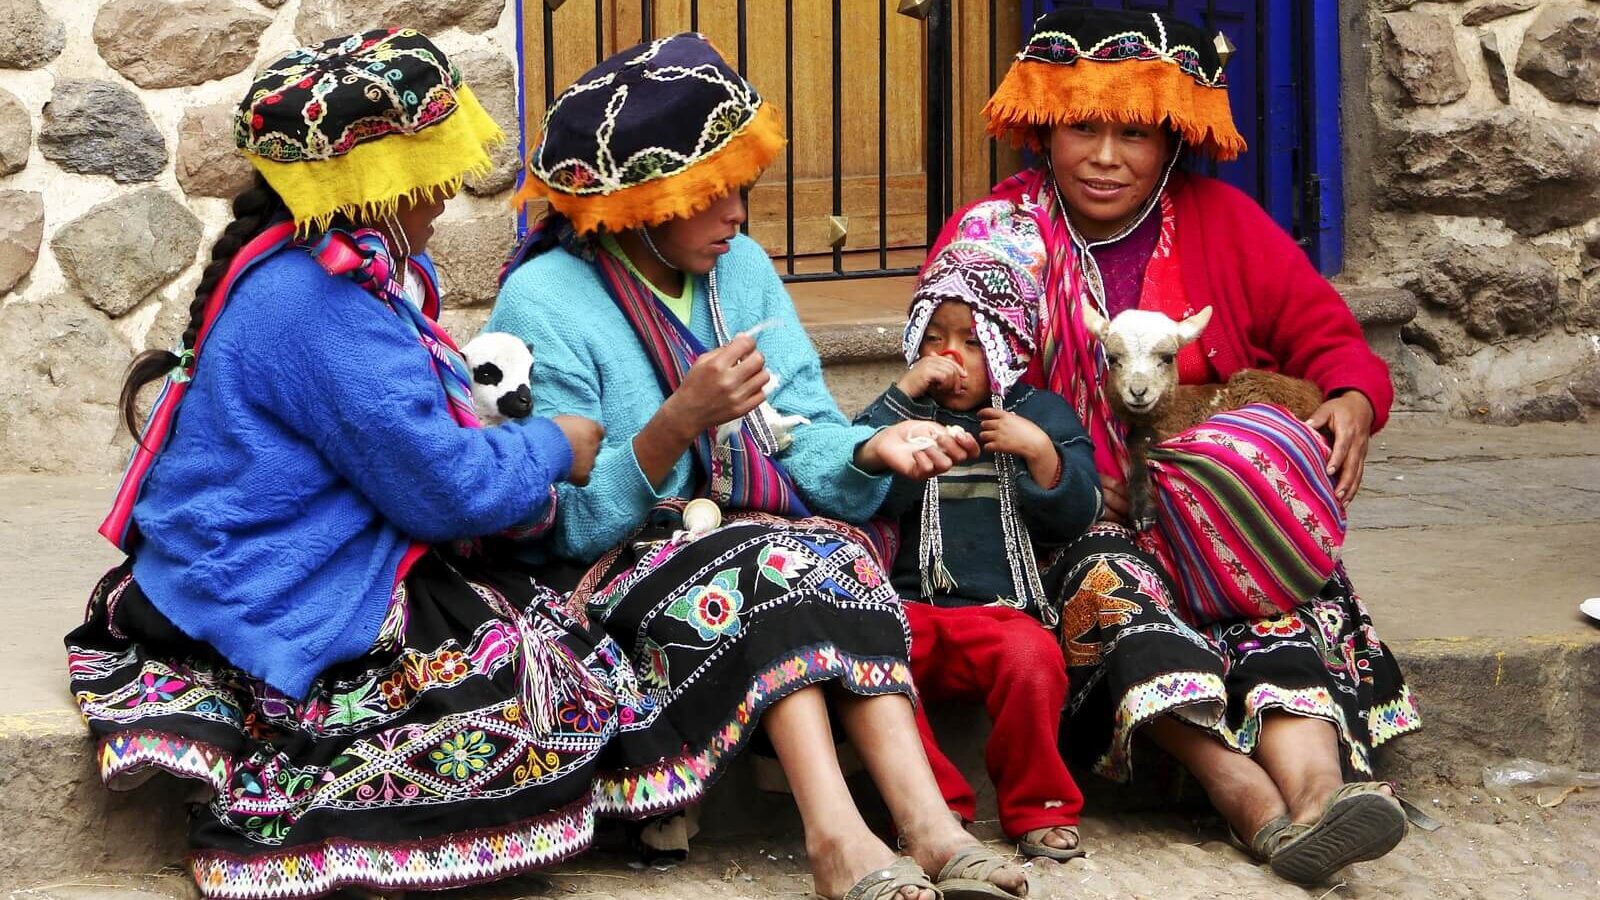 Local ladies in traditional dresses on the streets of Cusco, Peru. | RESPONSible Travel Peru